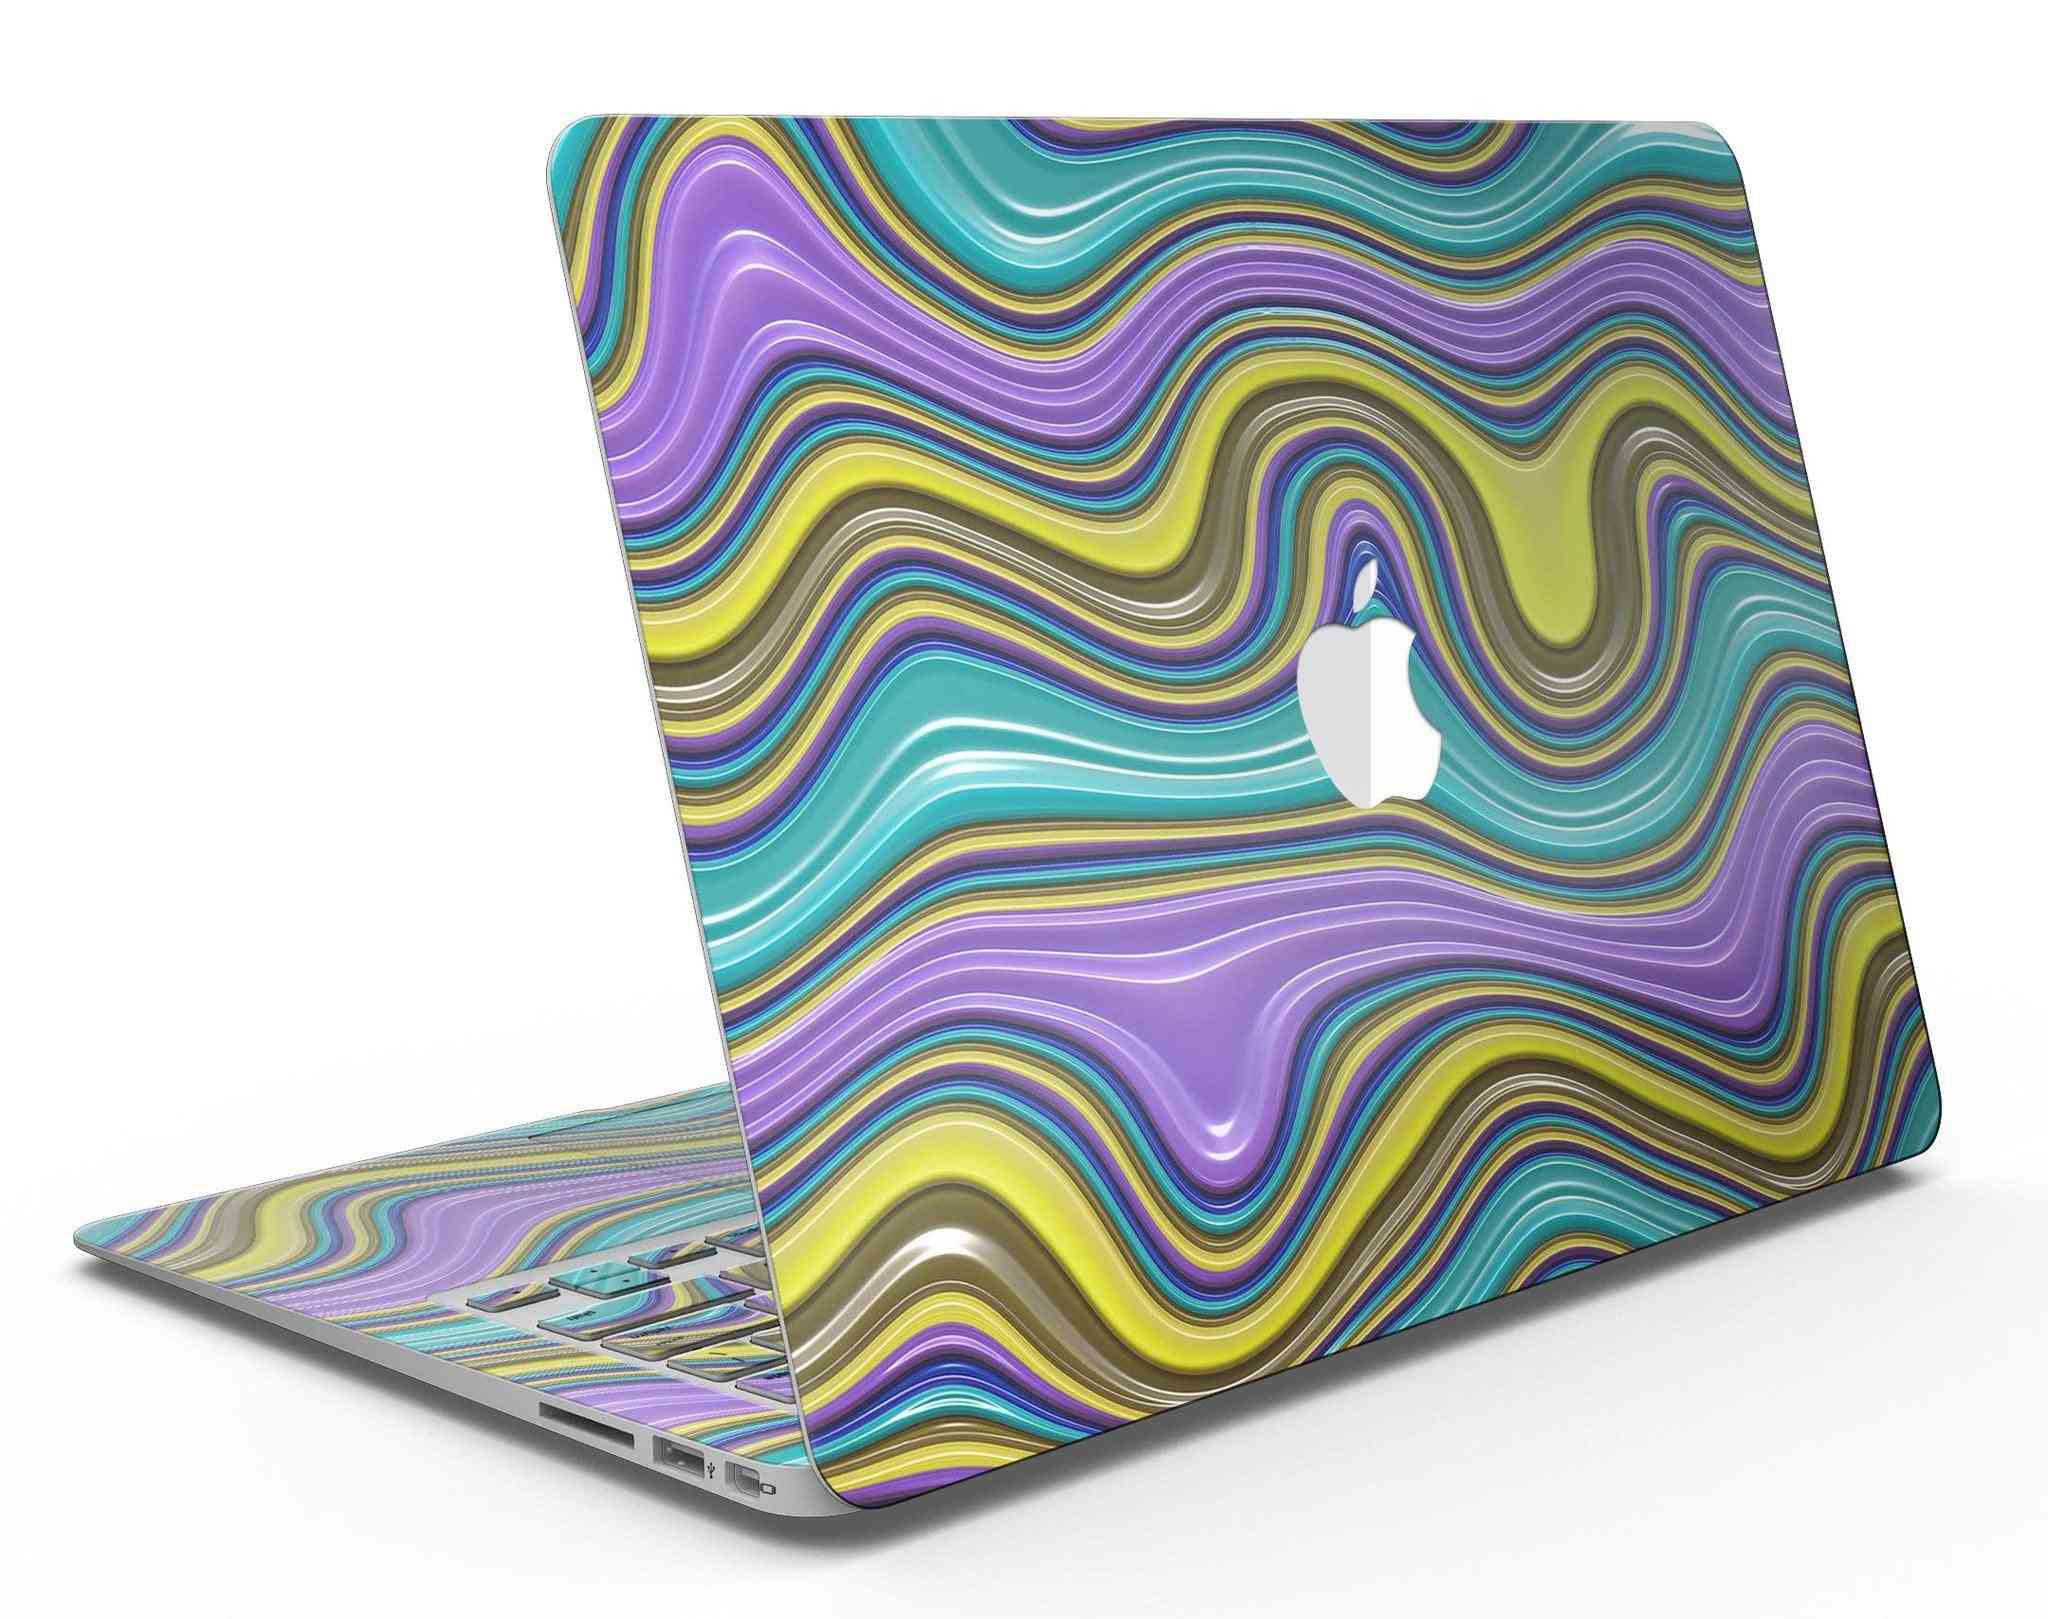 Bright Purple Teal And Mustard Yellow Color Waves - Macbook Air Skin